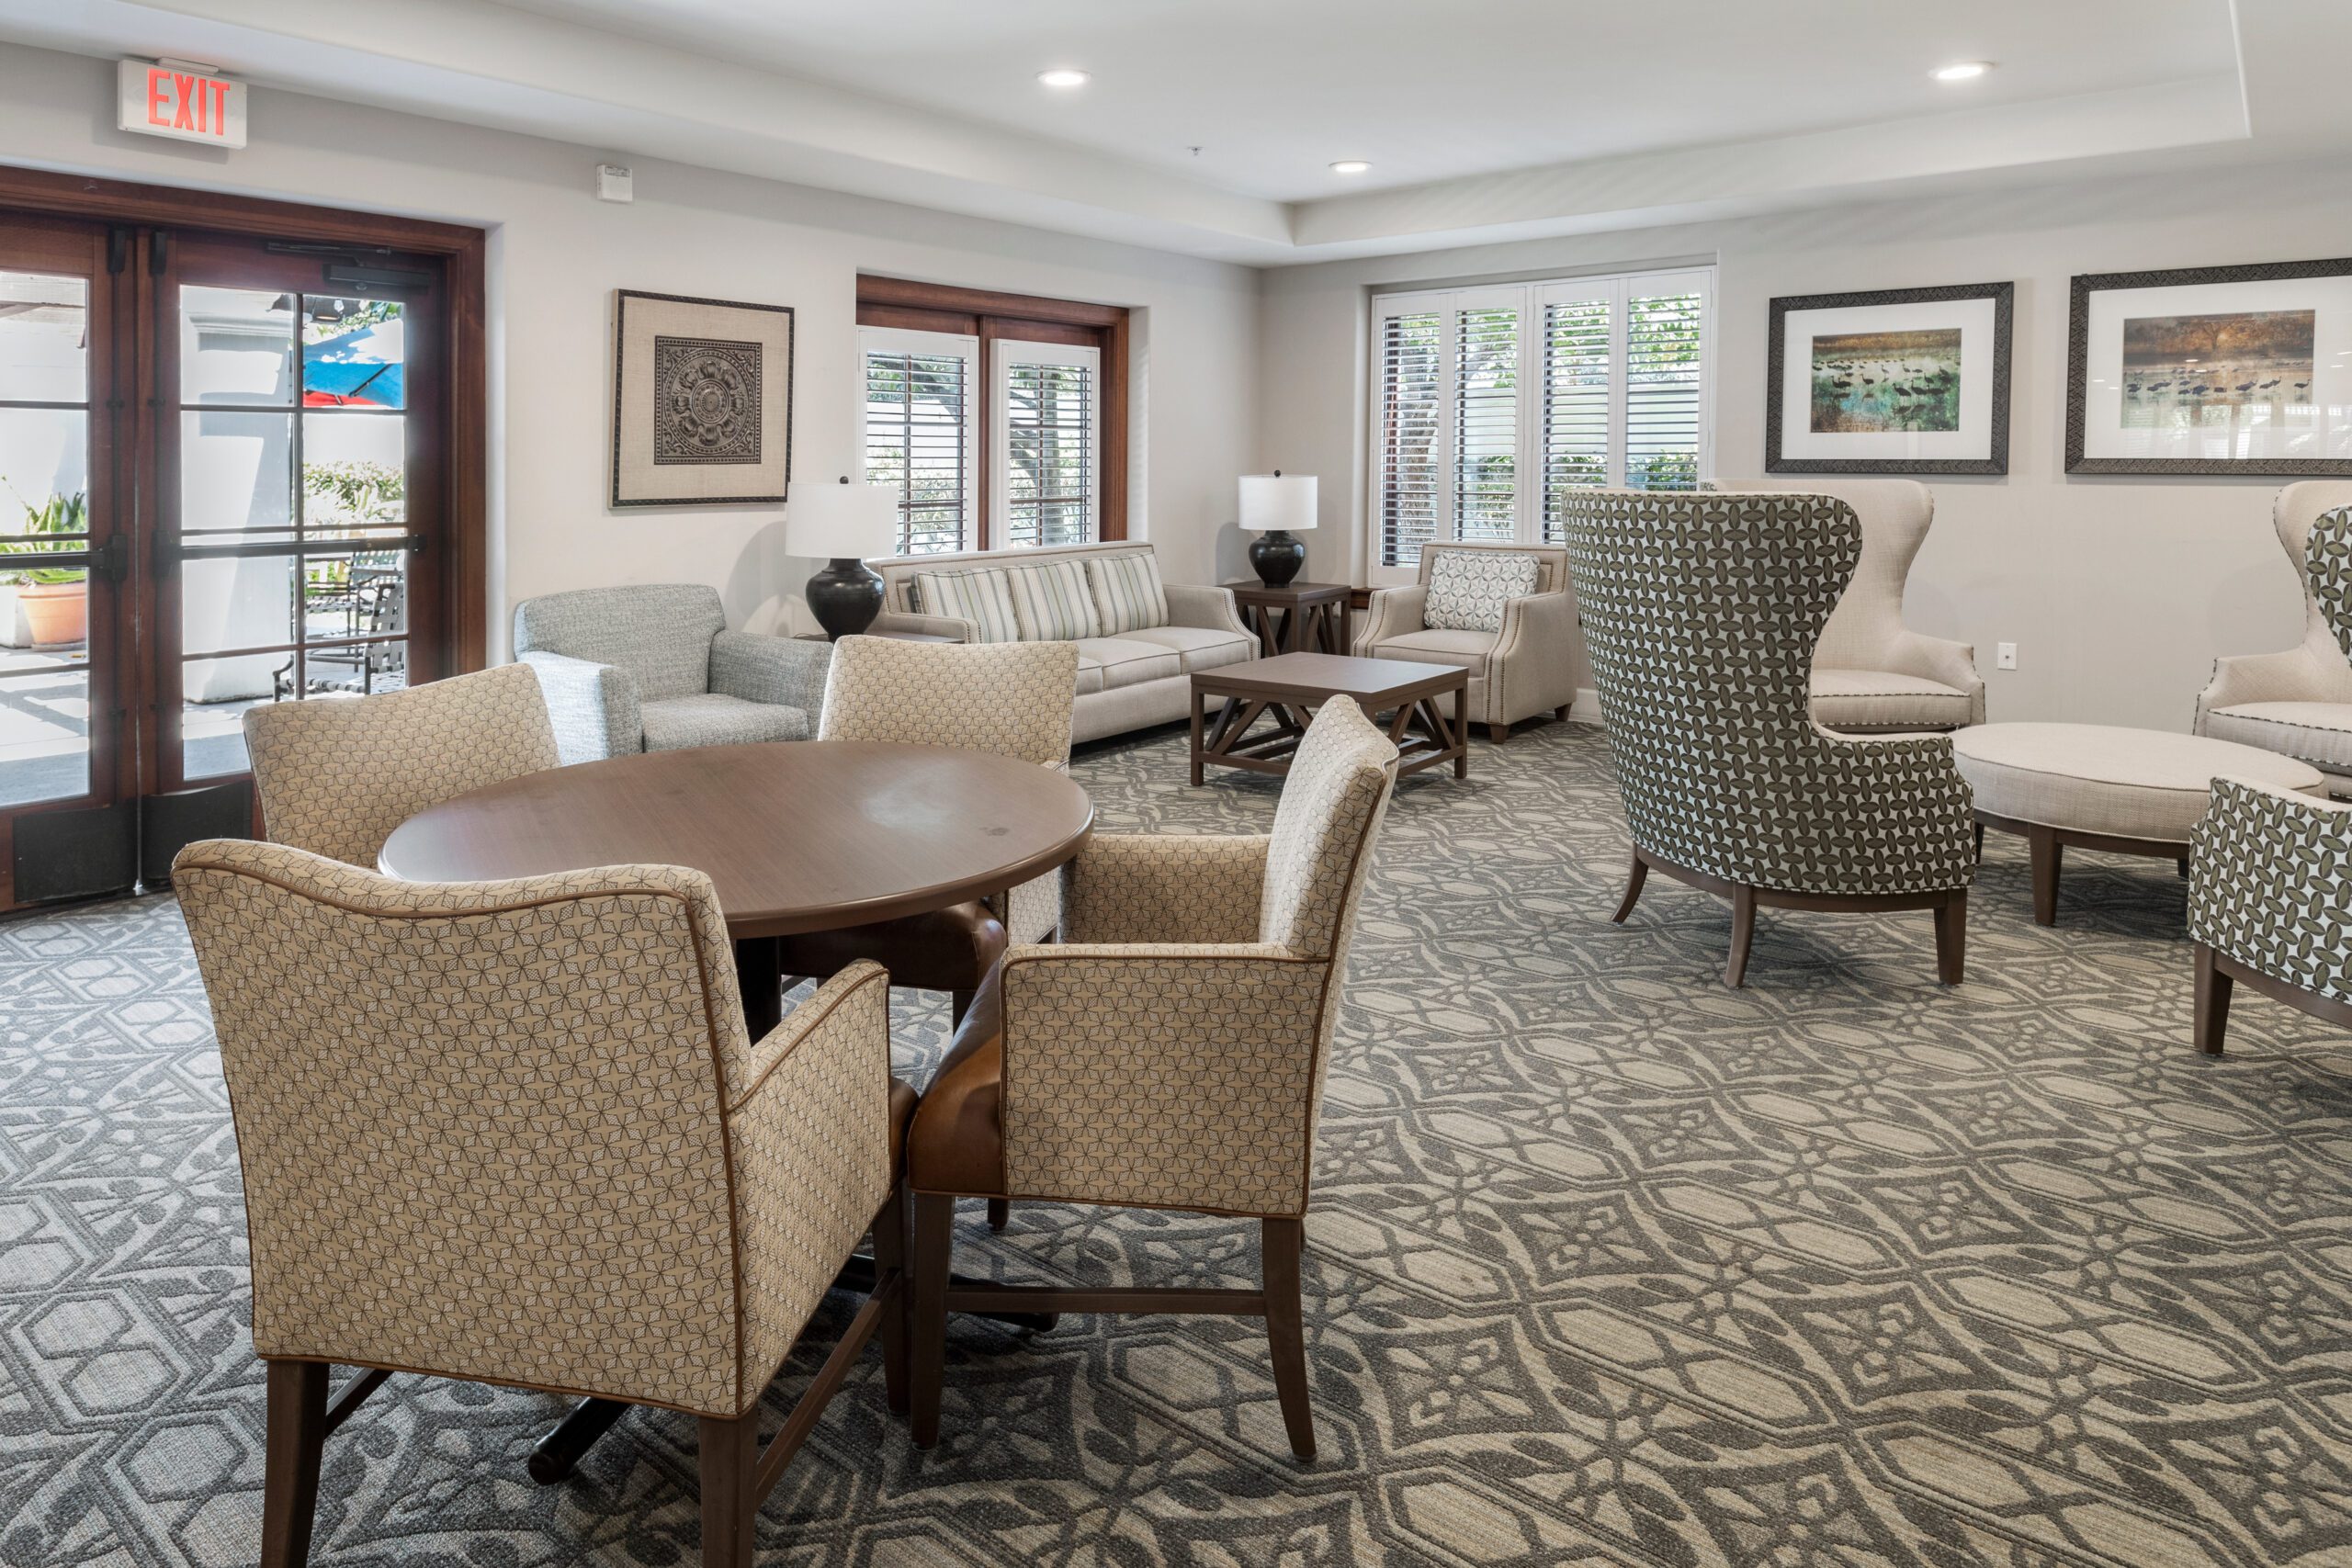 A cozy living room in a senior living community, featuring comfortable furniture and a warm ambiance.